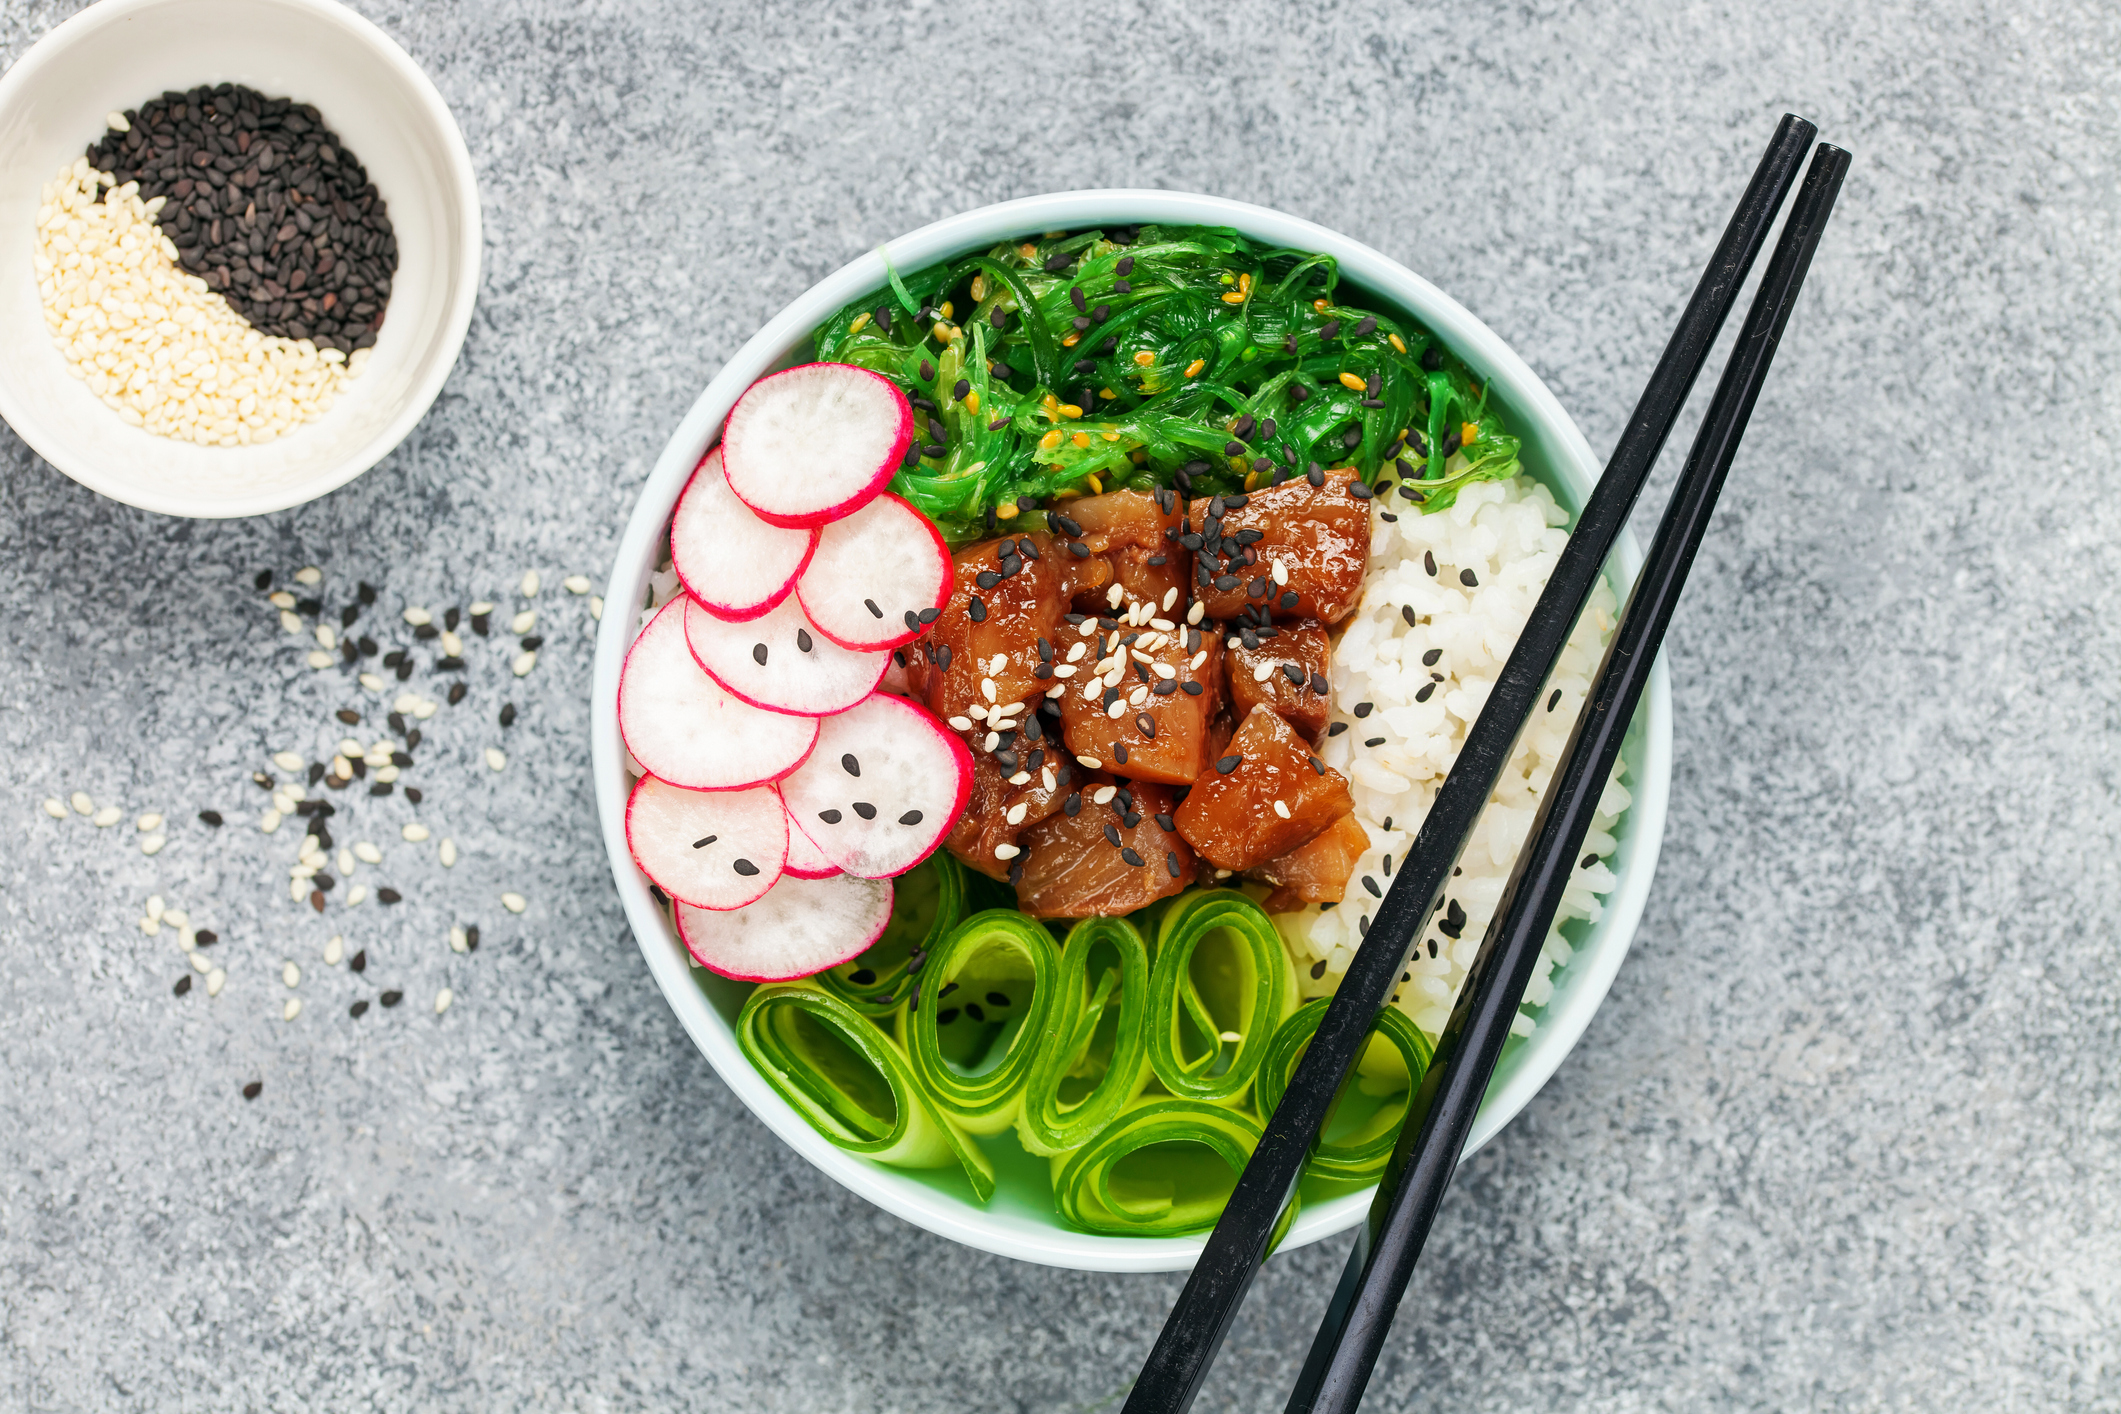 Getty Images - Poke Bowl